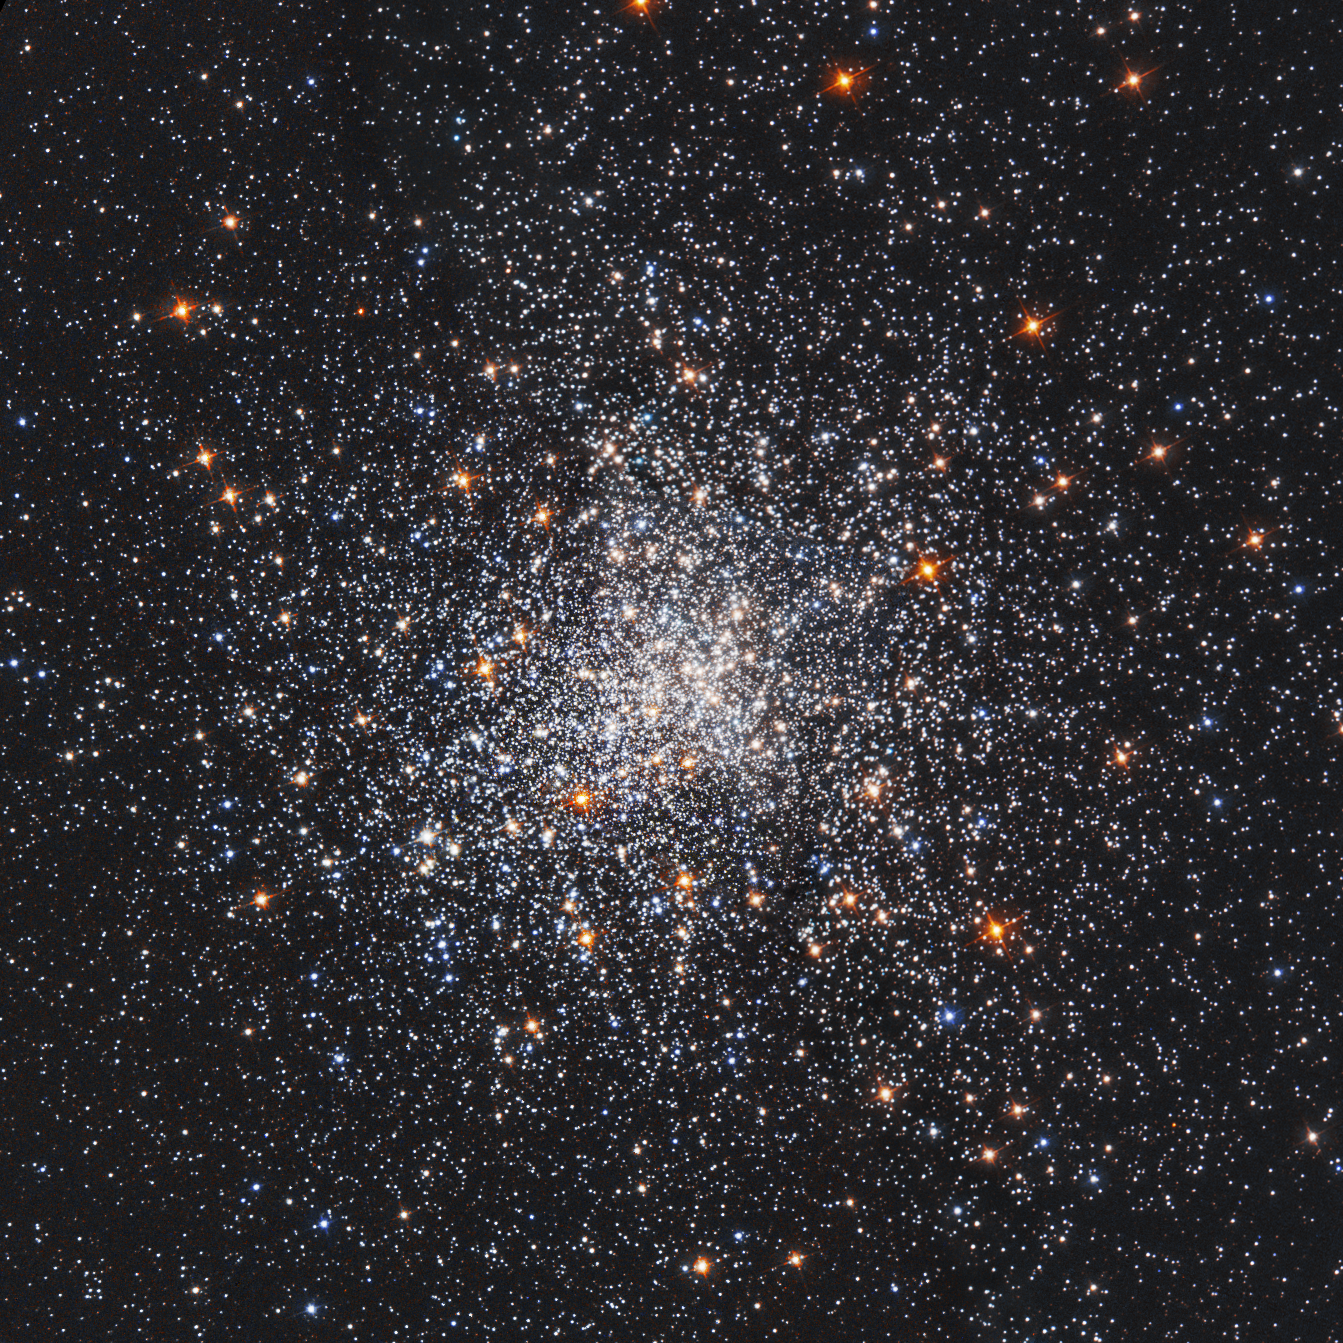 A cluster or white and orange stars, more densely concentrated at the center.